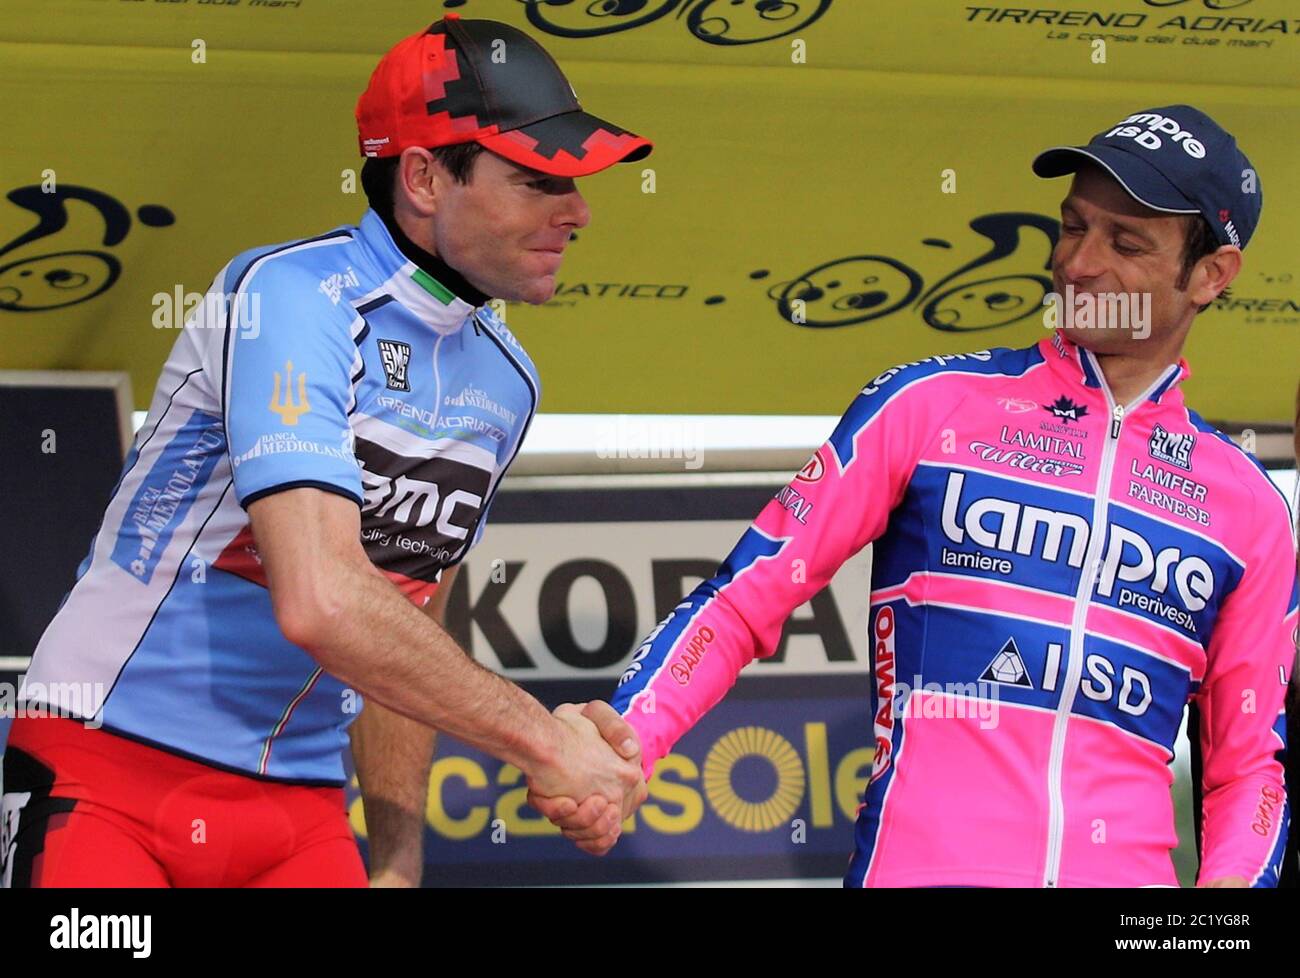 Cadel Evans of BMC Racing Team and Michele Scarponi of Lampre - ISD during the Tirreno Adriatico  2011, Stage 7 cycling race,San Benedetto (ITT) (9.3k Km) on March15, 2011 in San Benedetto, Italie - Photo Laurent Lairys / DPPI Stock Photo